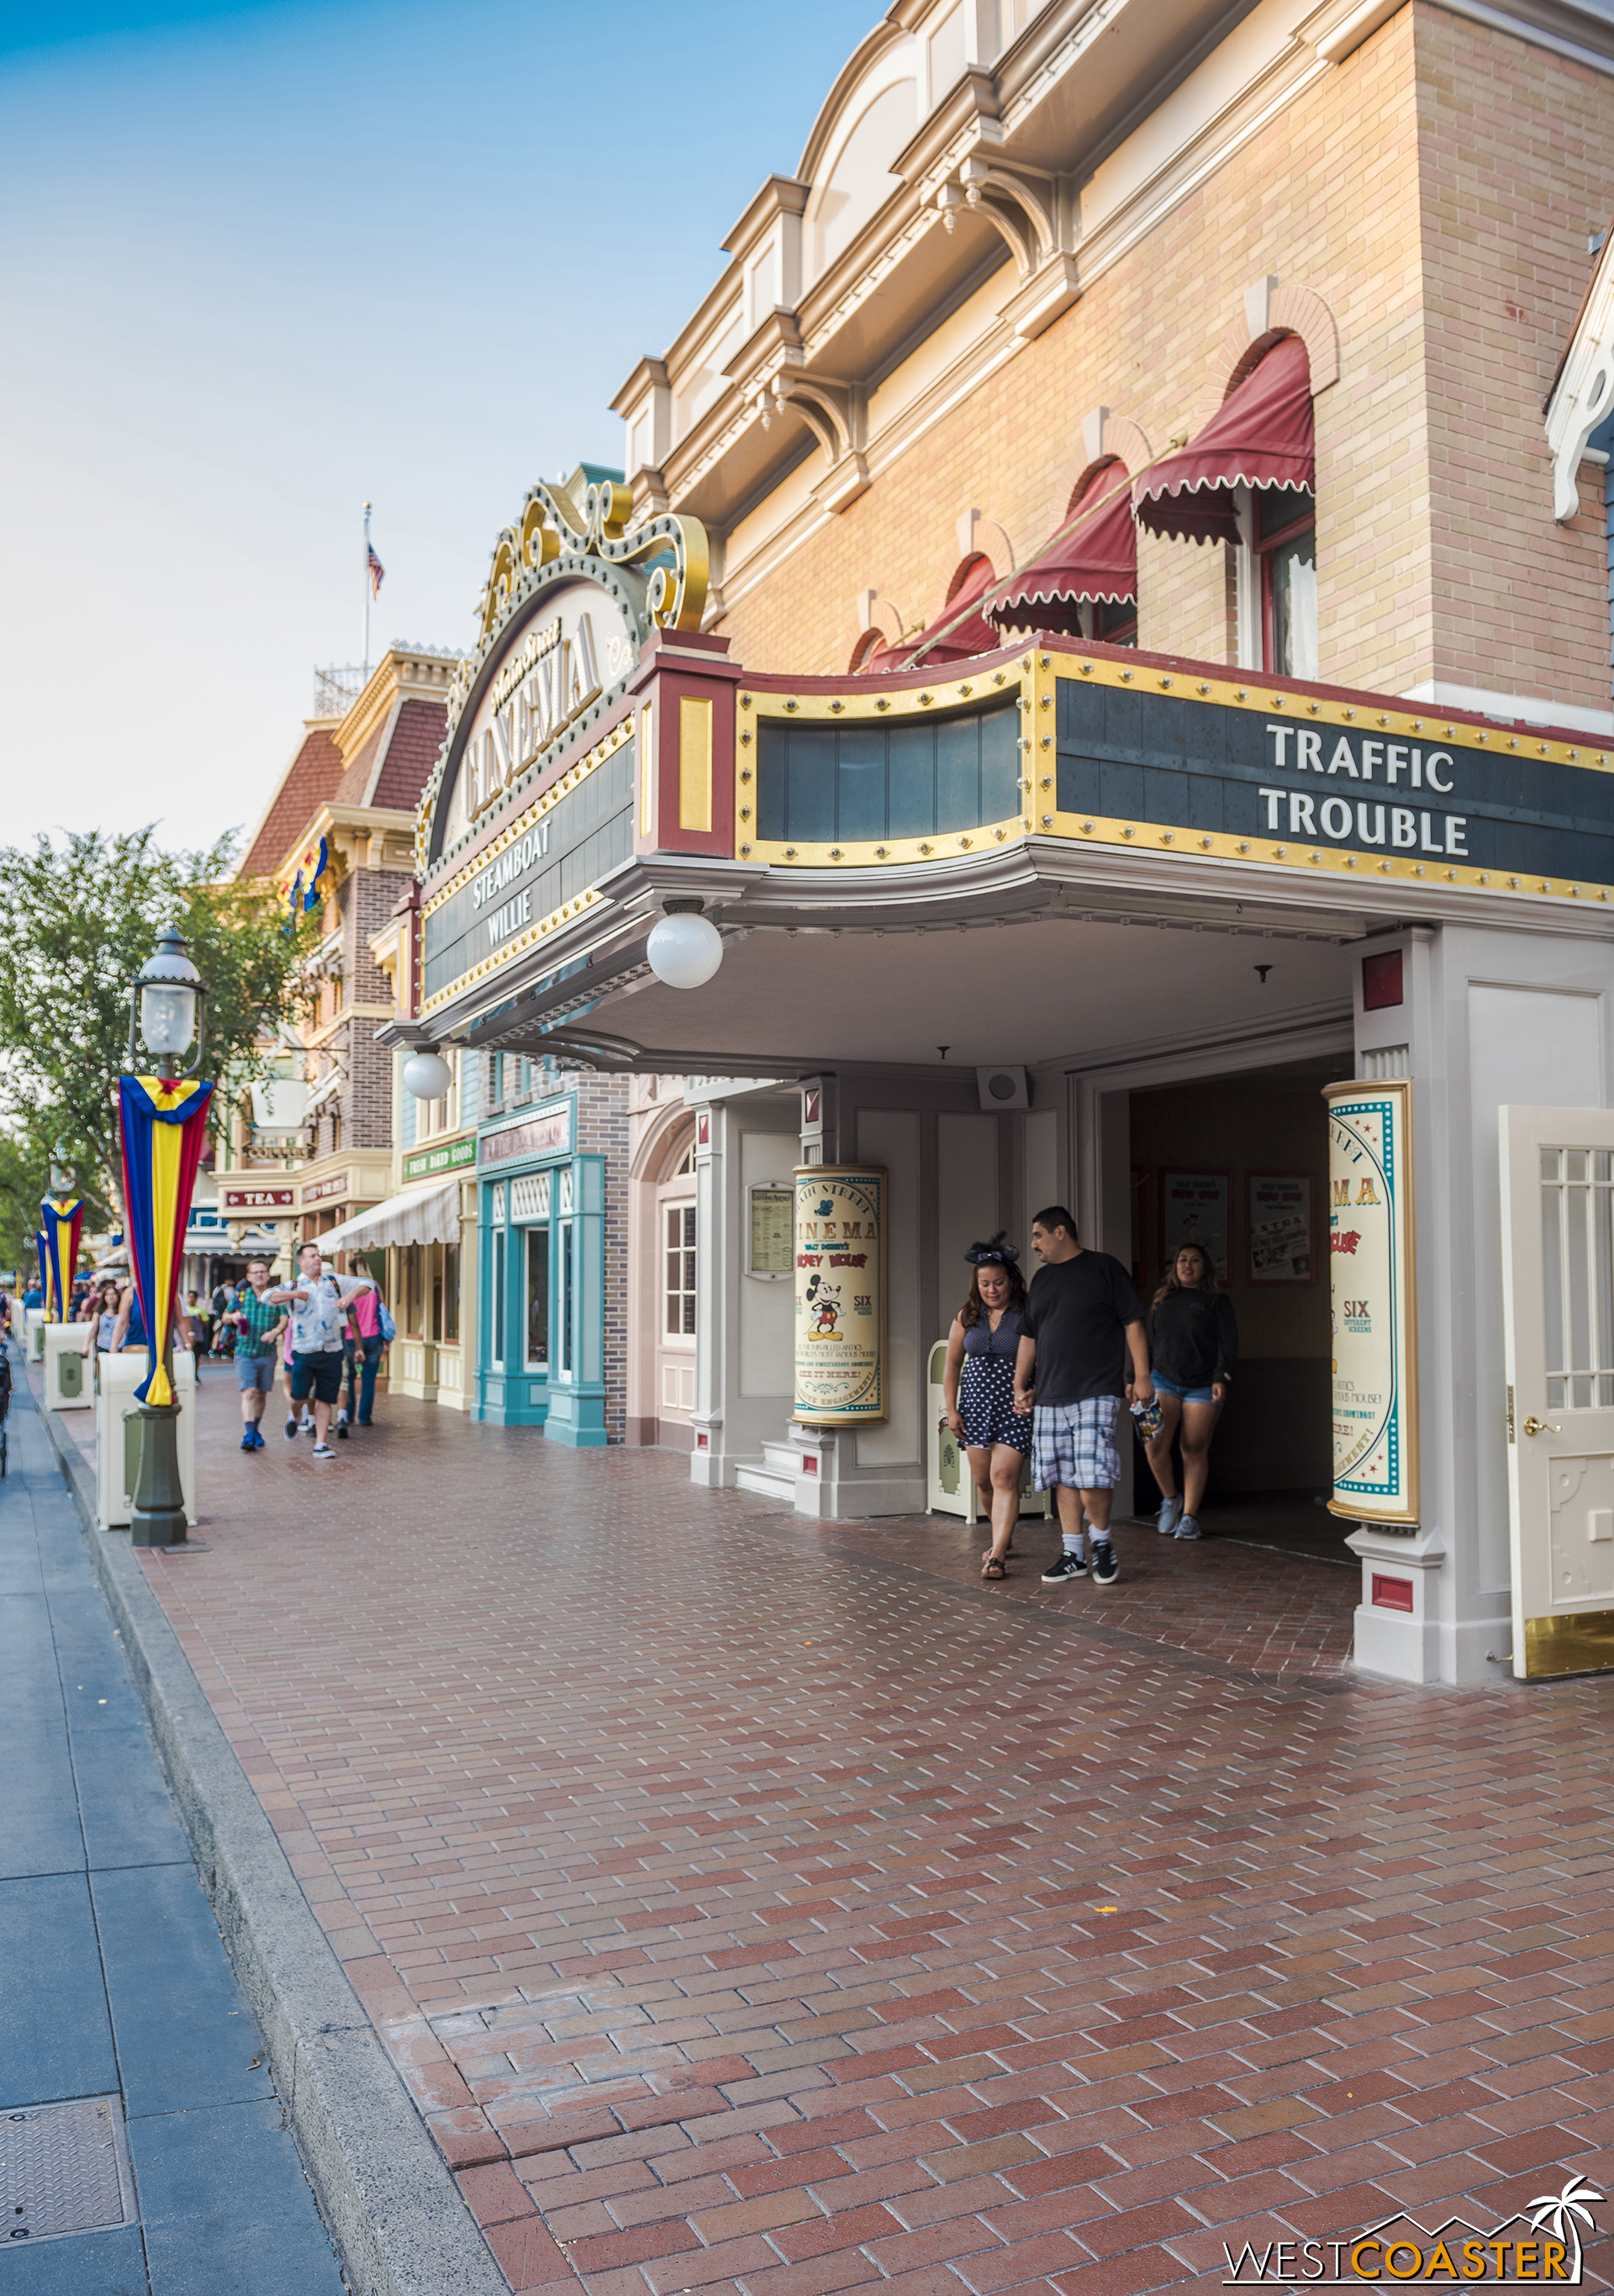  OH NOOOOEEEESSSS THE MAIN STREET INDIAN IS GONE!!!  But likely just for refurbishment. Otherwise, the brick patch job on the ground would have been better. 